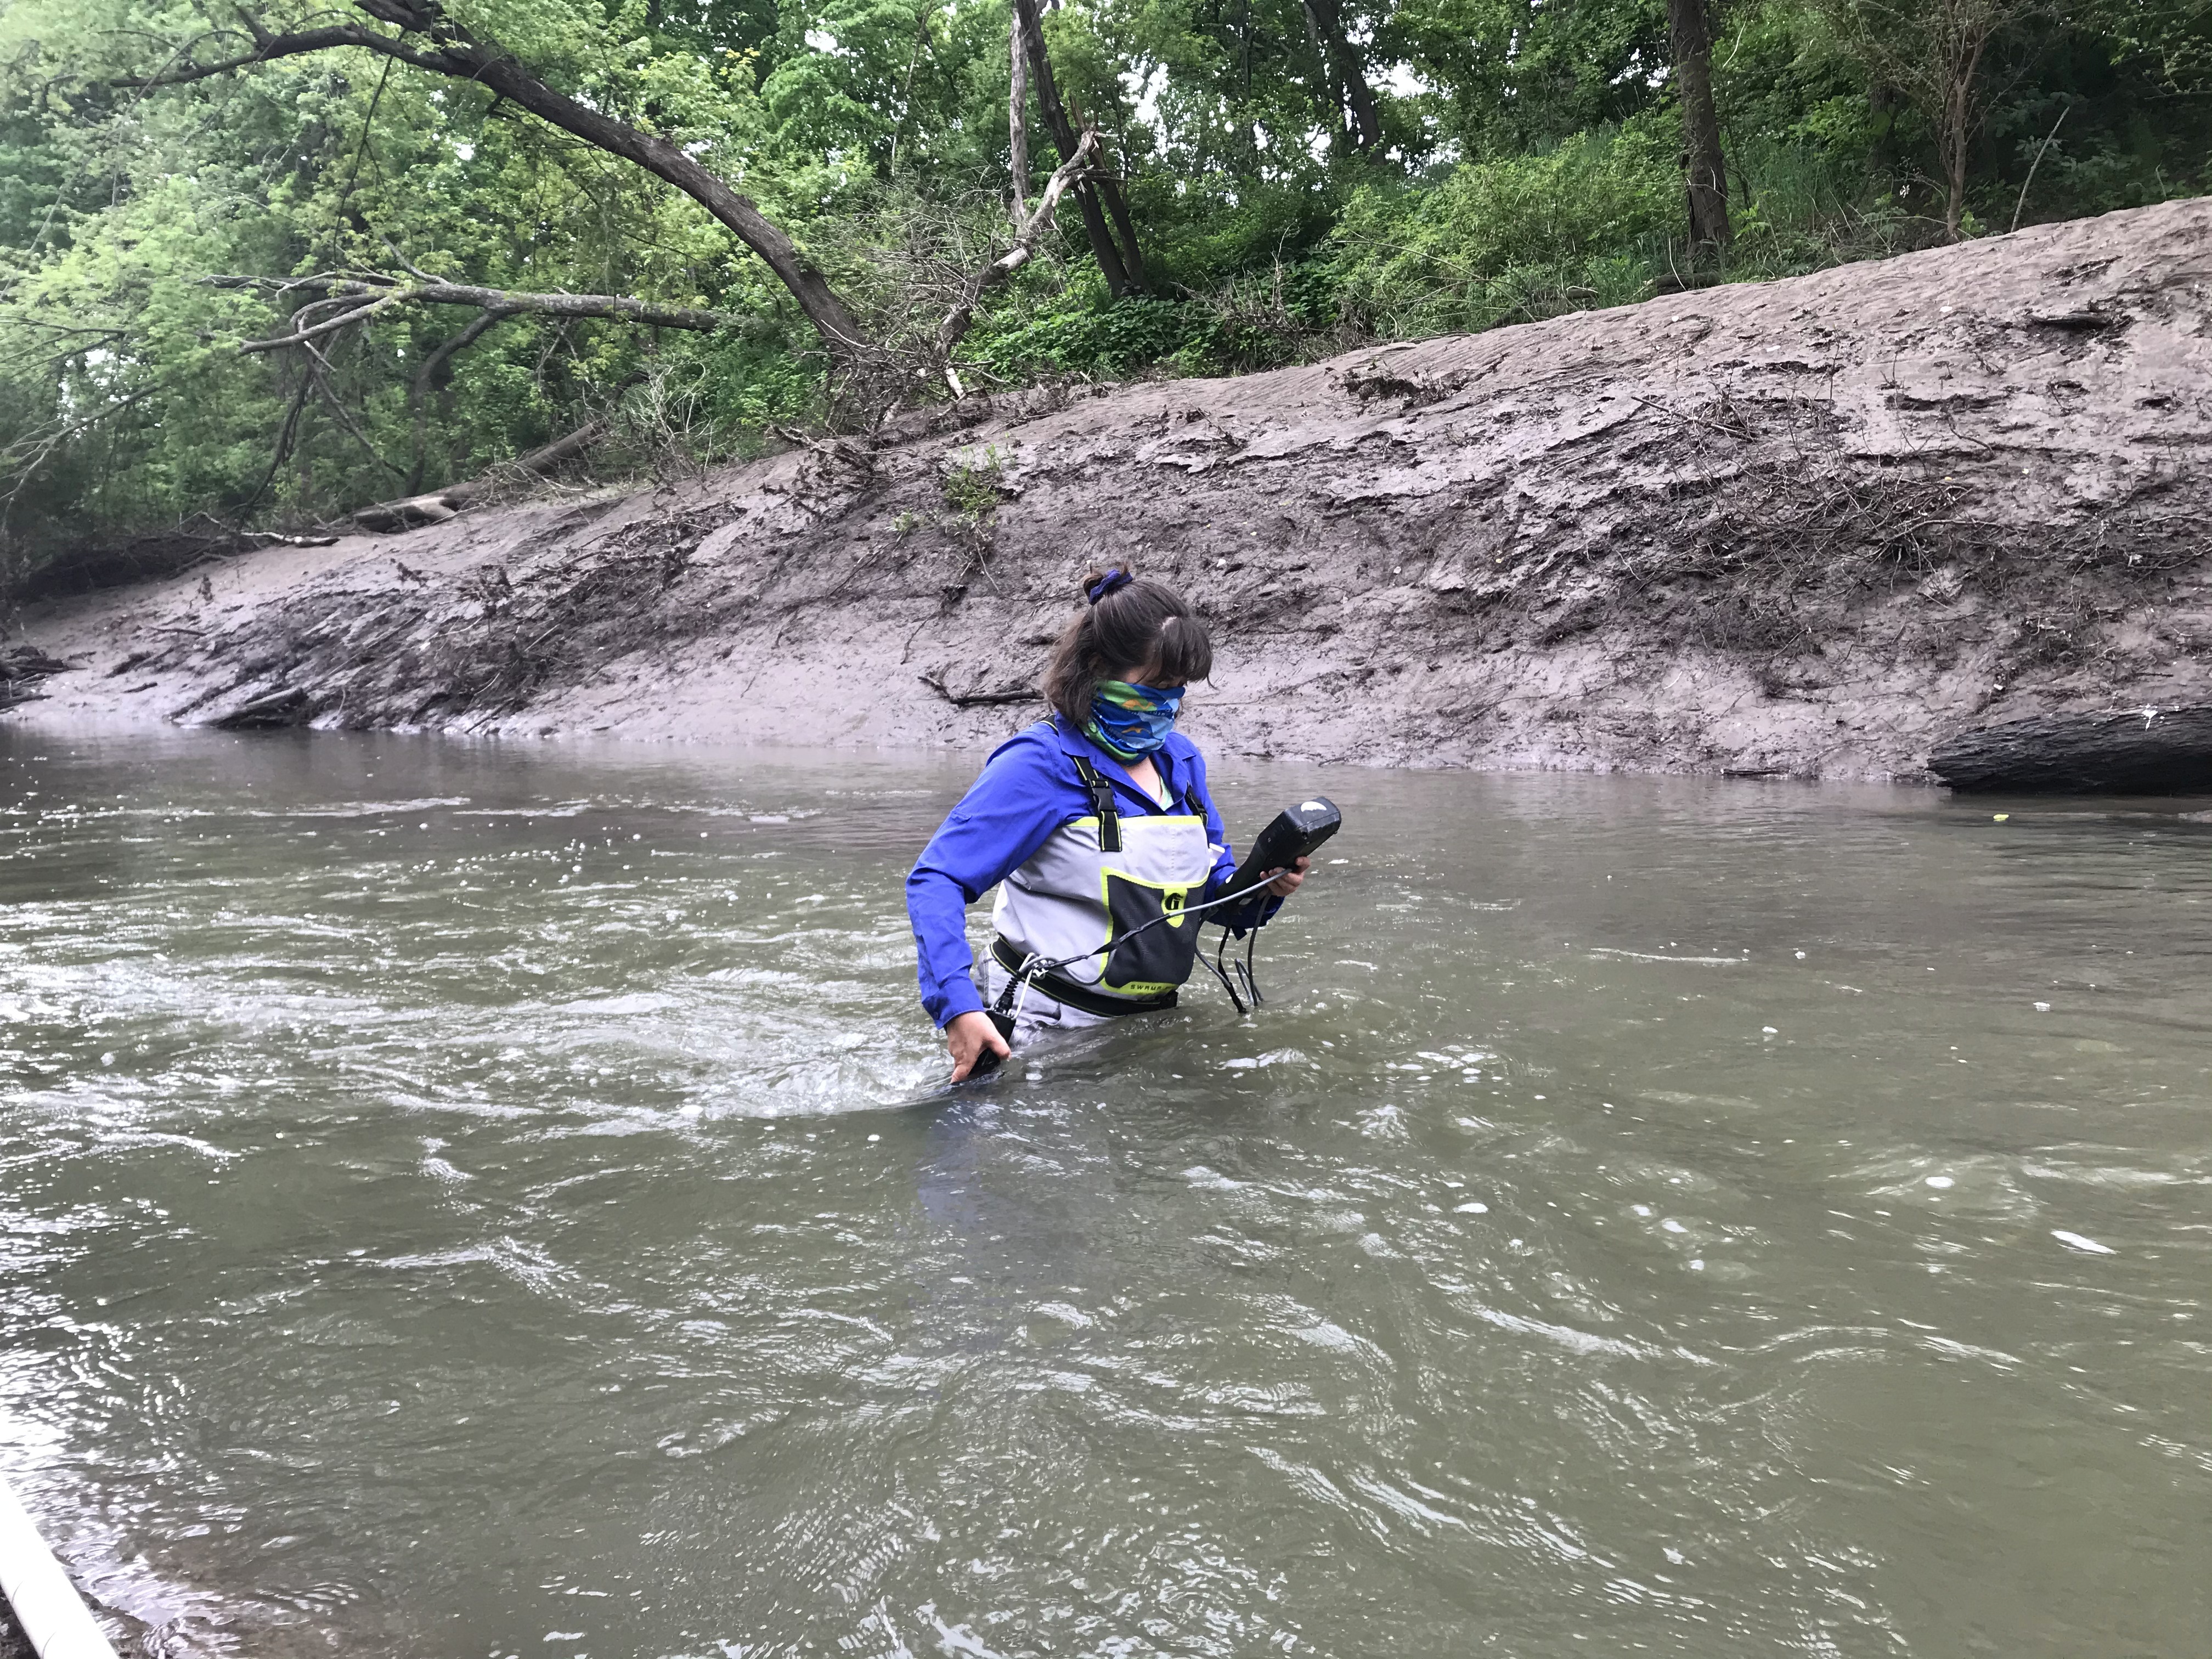 Debbie Baker measuring water chemistry at the upper Wakarusa River site, 20 May 2020.